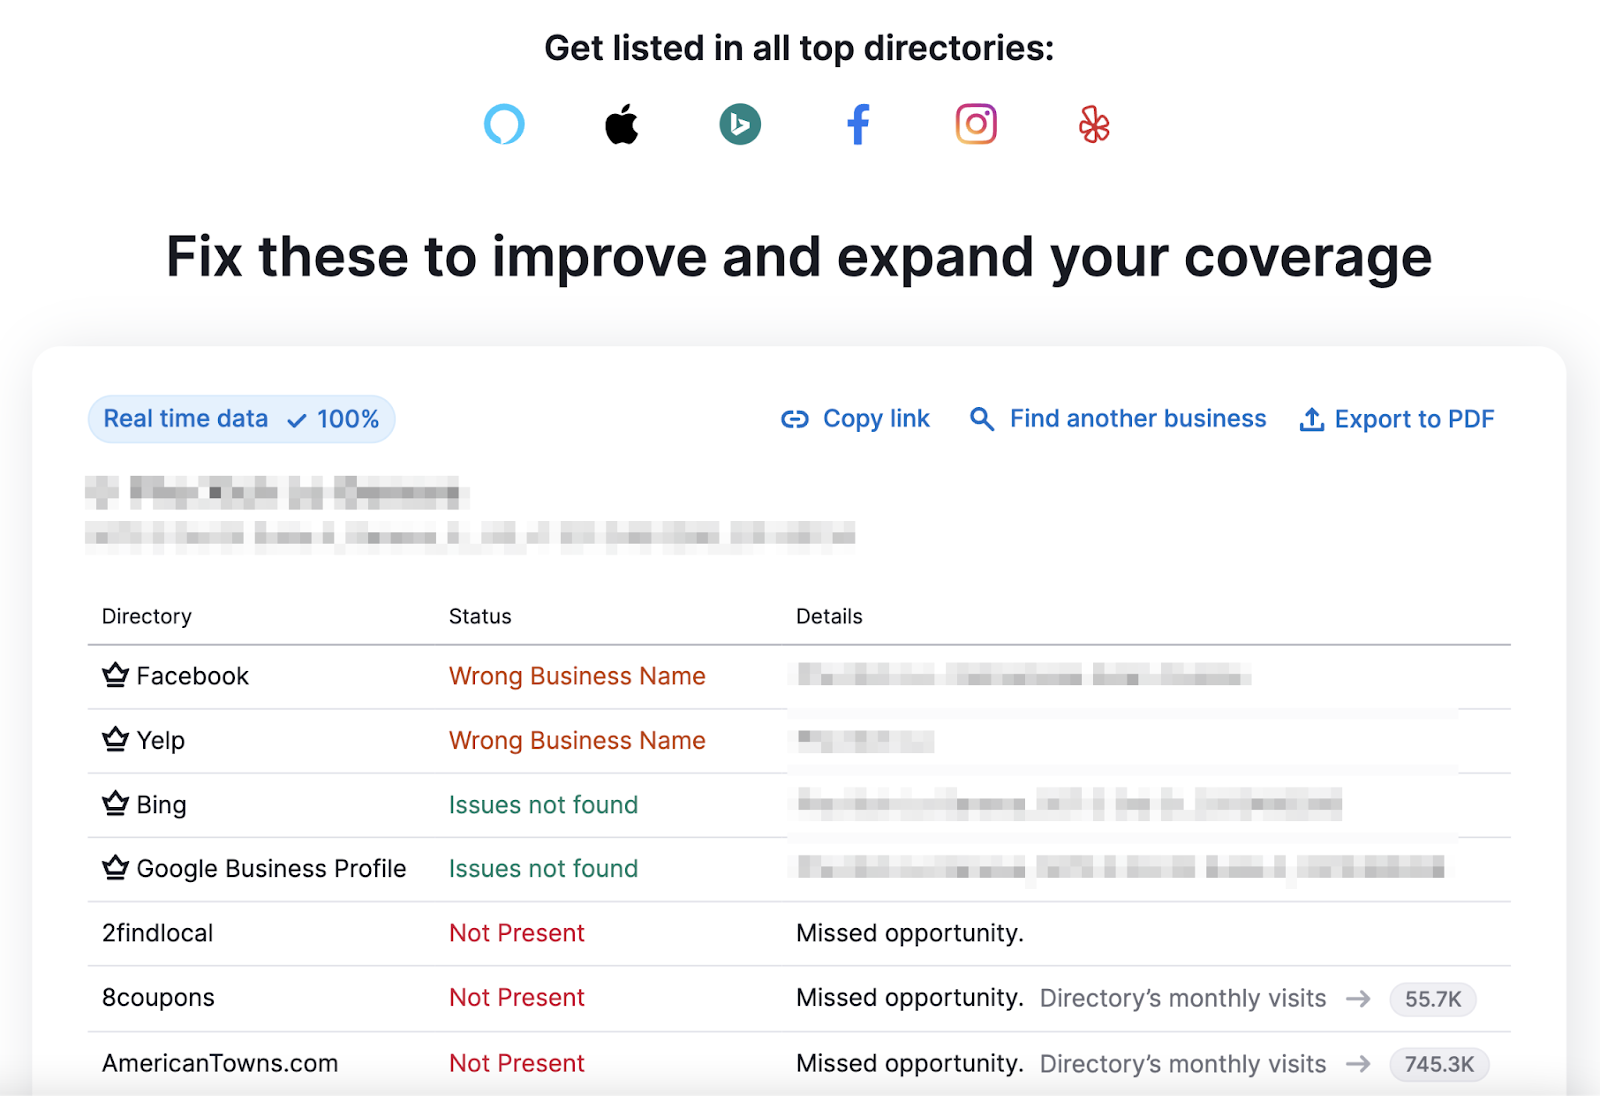 "Fix these to improve and expand your coverage" page in Listing Management tool